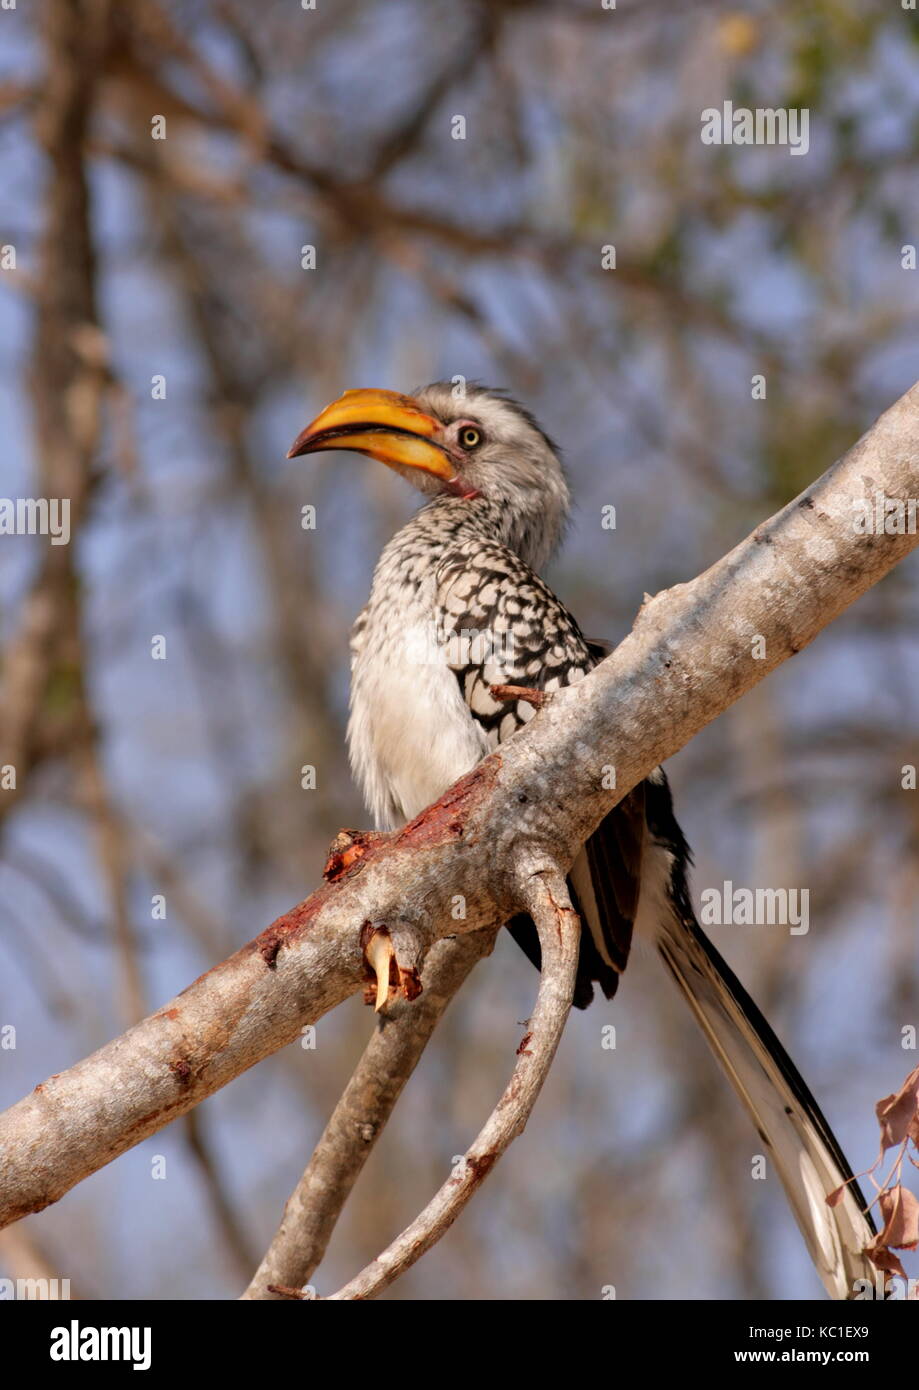 Southern Yellow Billed Hornbill perched on a tree in the Kruger National Park, South Africa Stock Photo